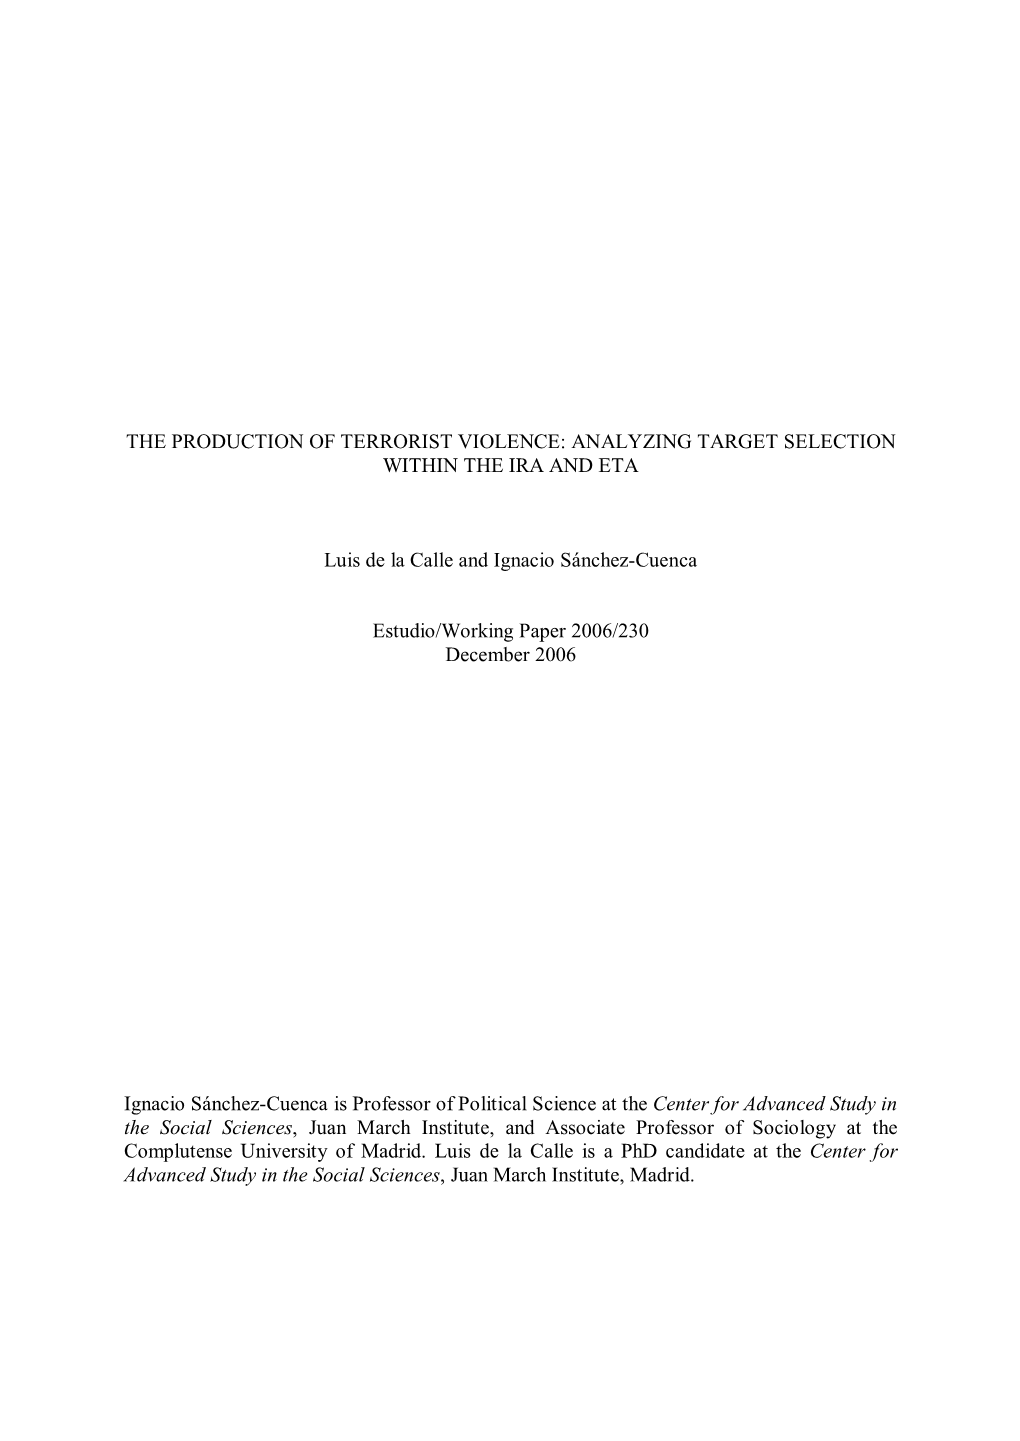 The Production of Terrorist Violence: Analyzing Target Selection Within the Ira and Eta